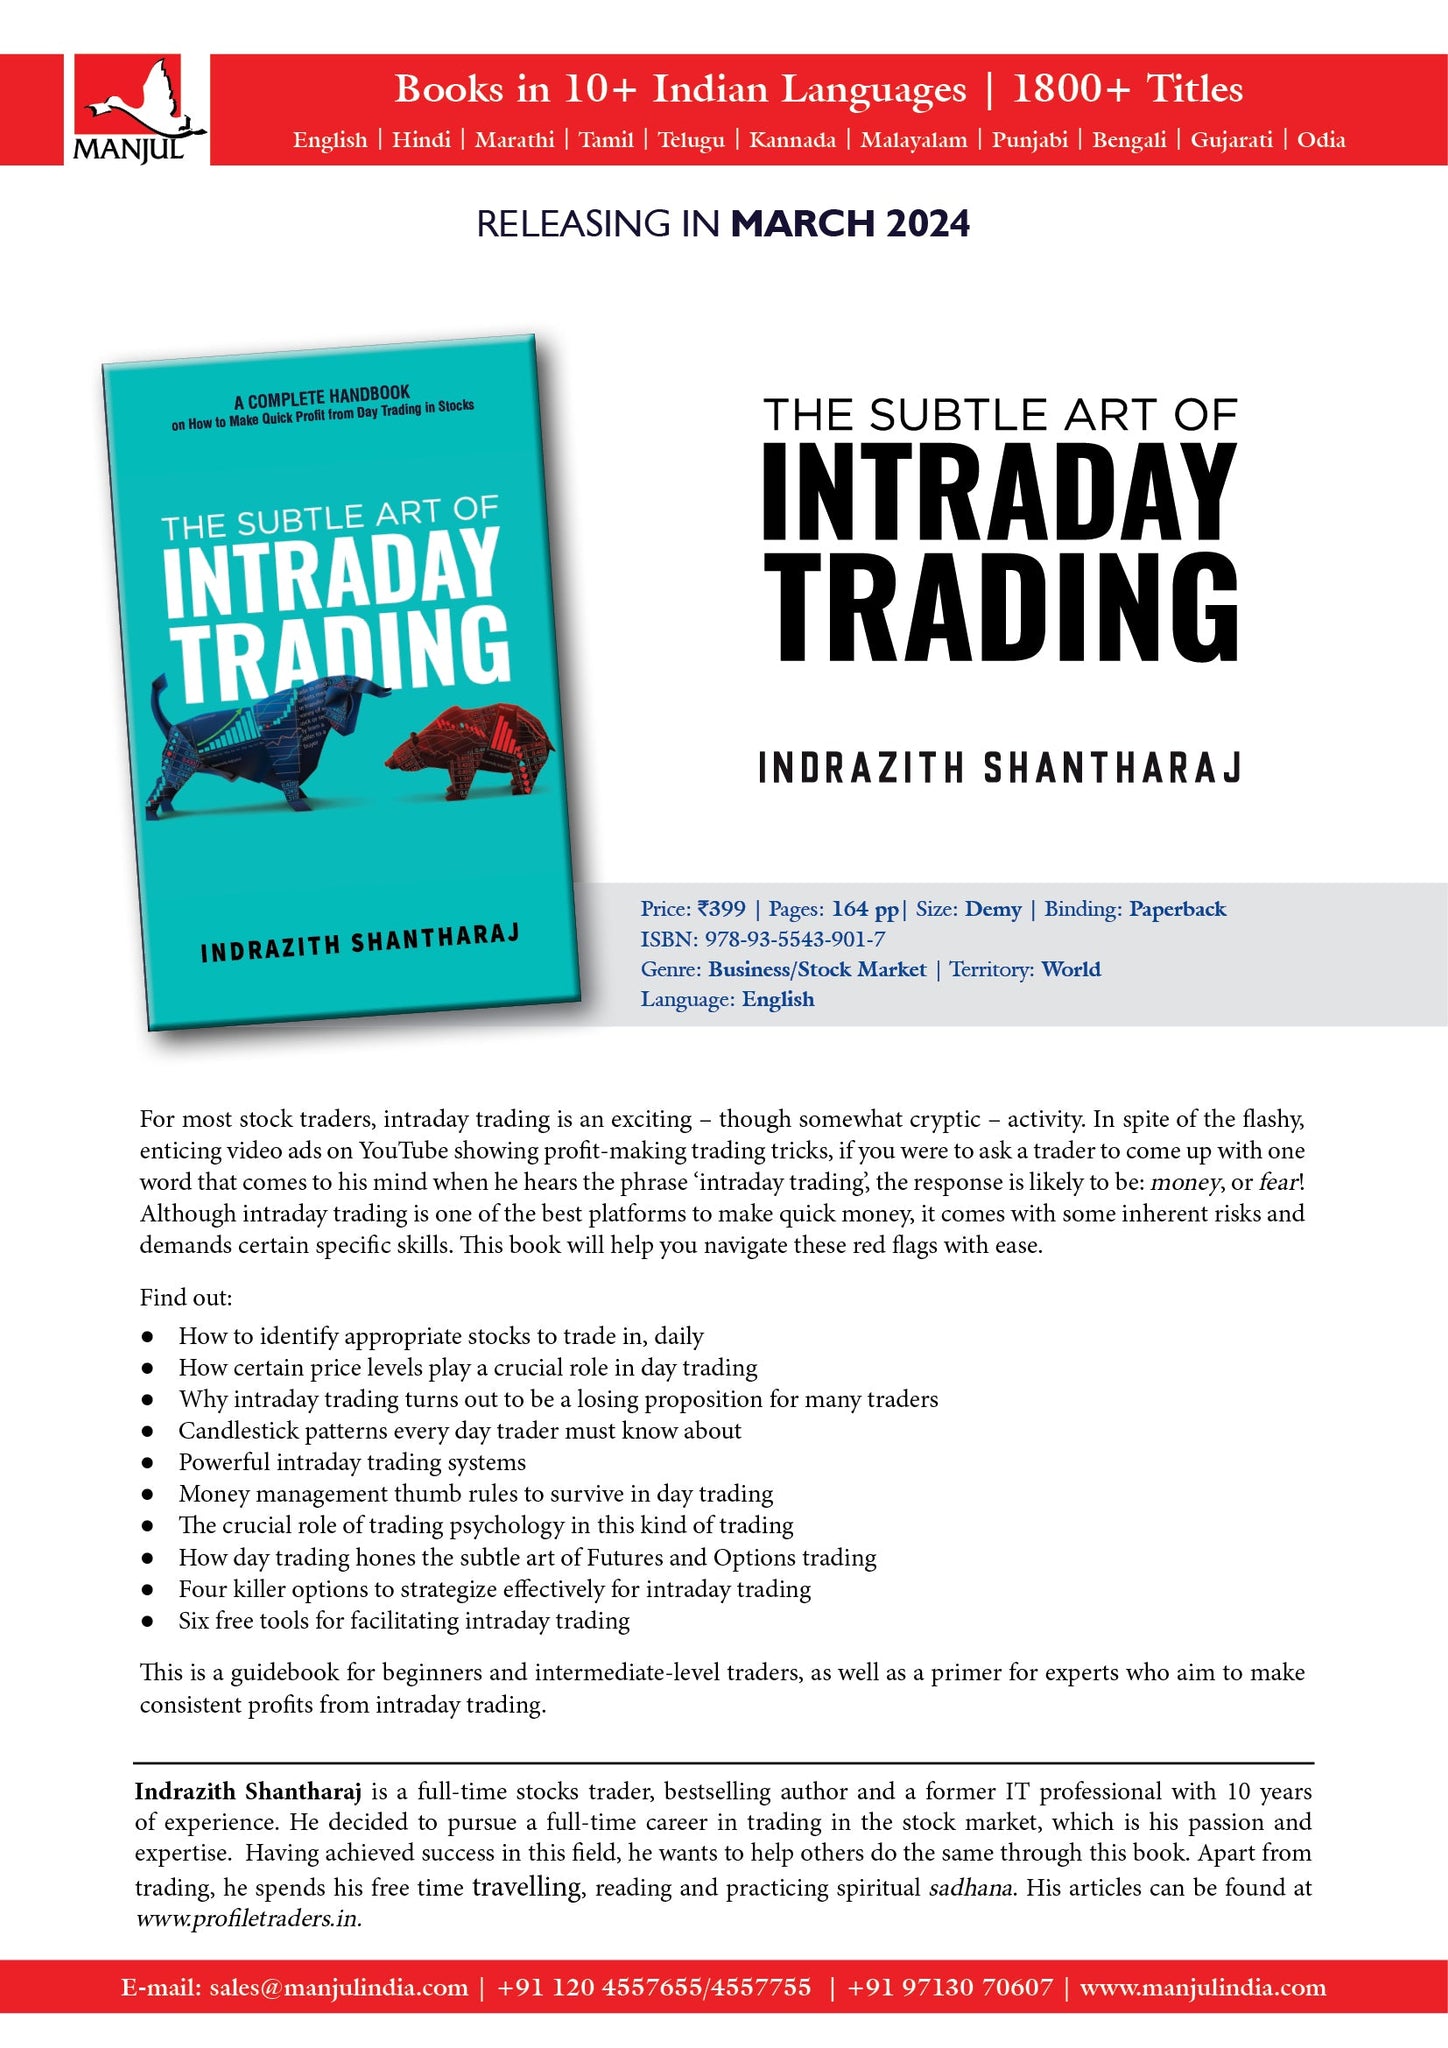 The Subtle art of Intraday Trading